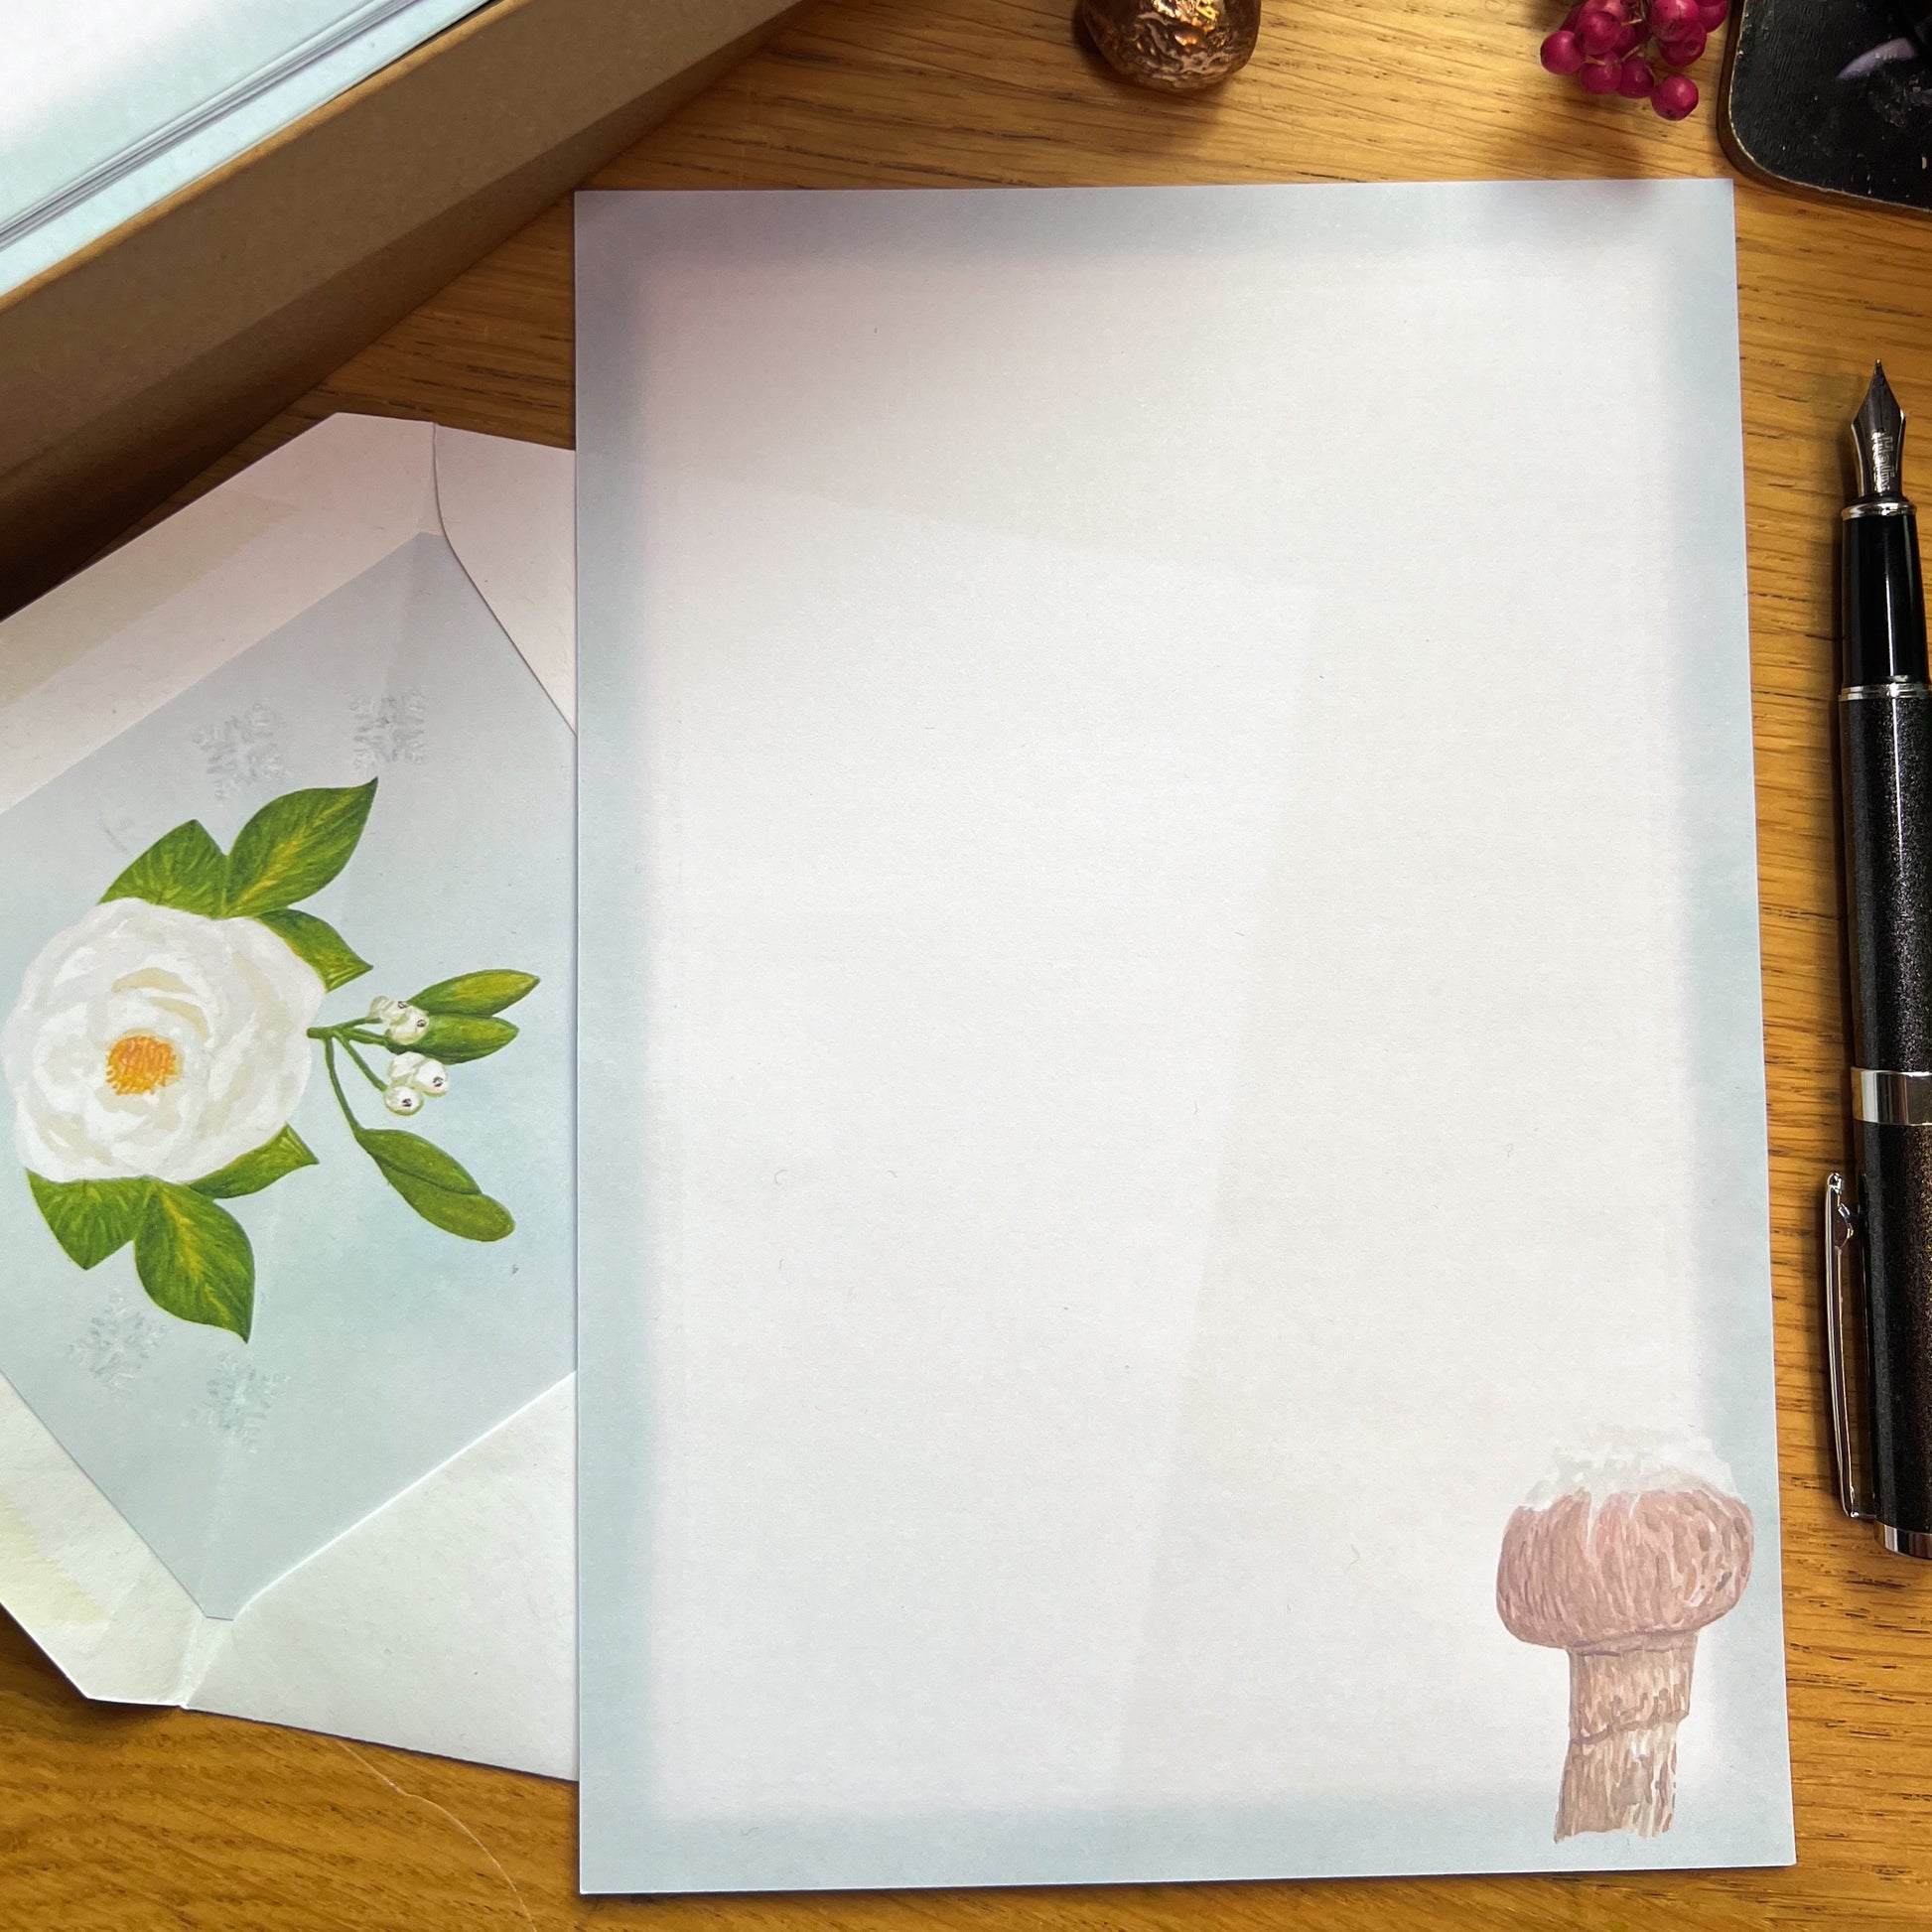 Snow topped honey fungus mushroom illustrated paper and white rose illustrated inlay in a white envelope, on a wooden desk